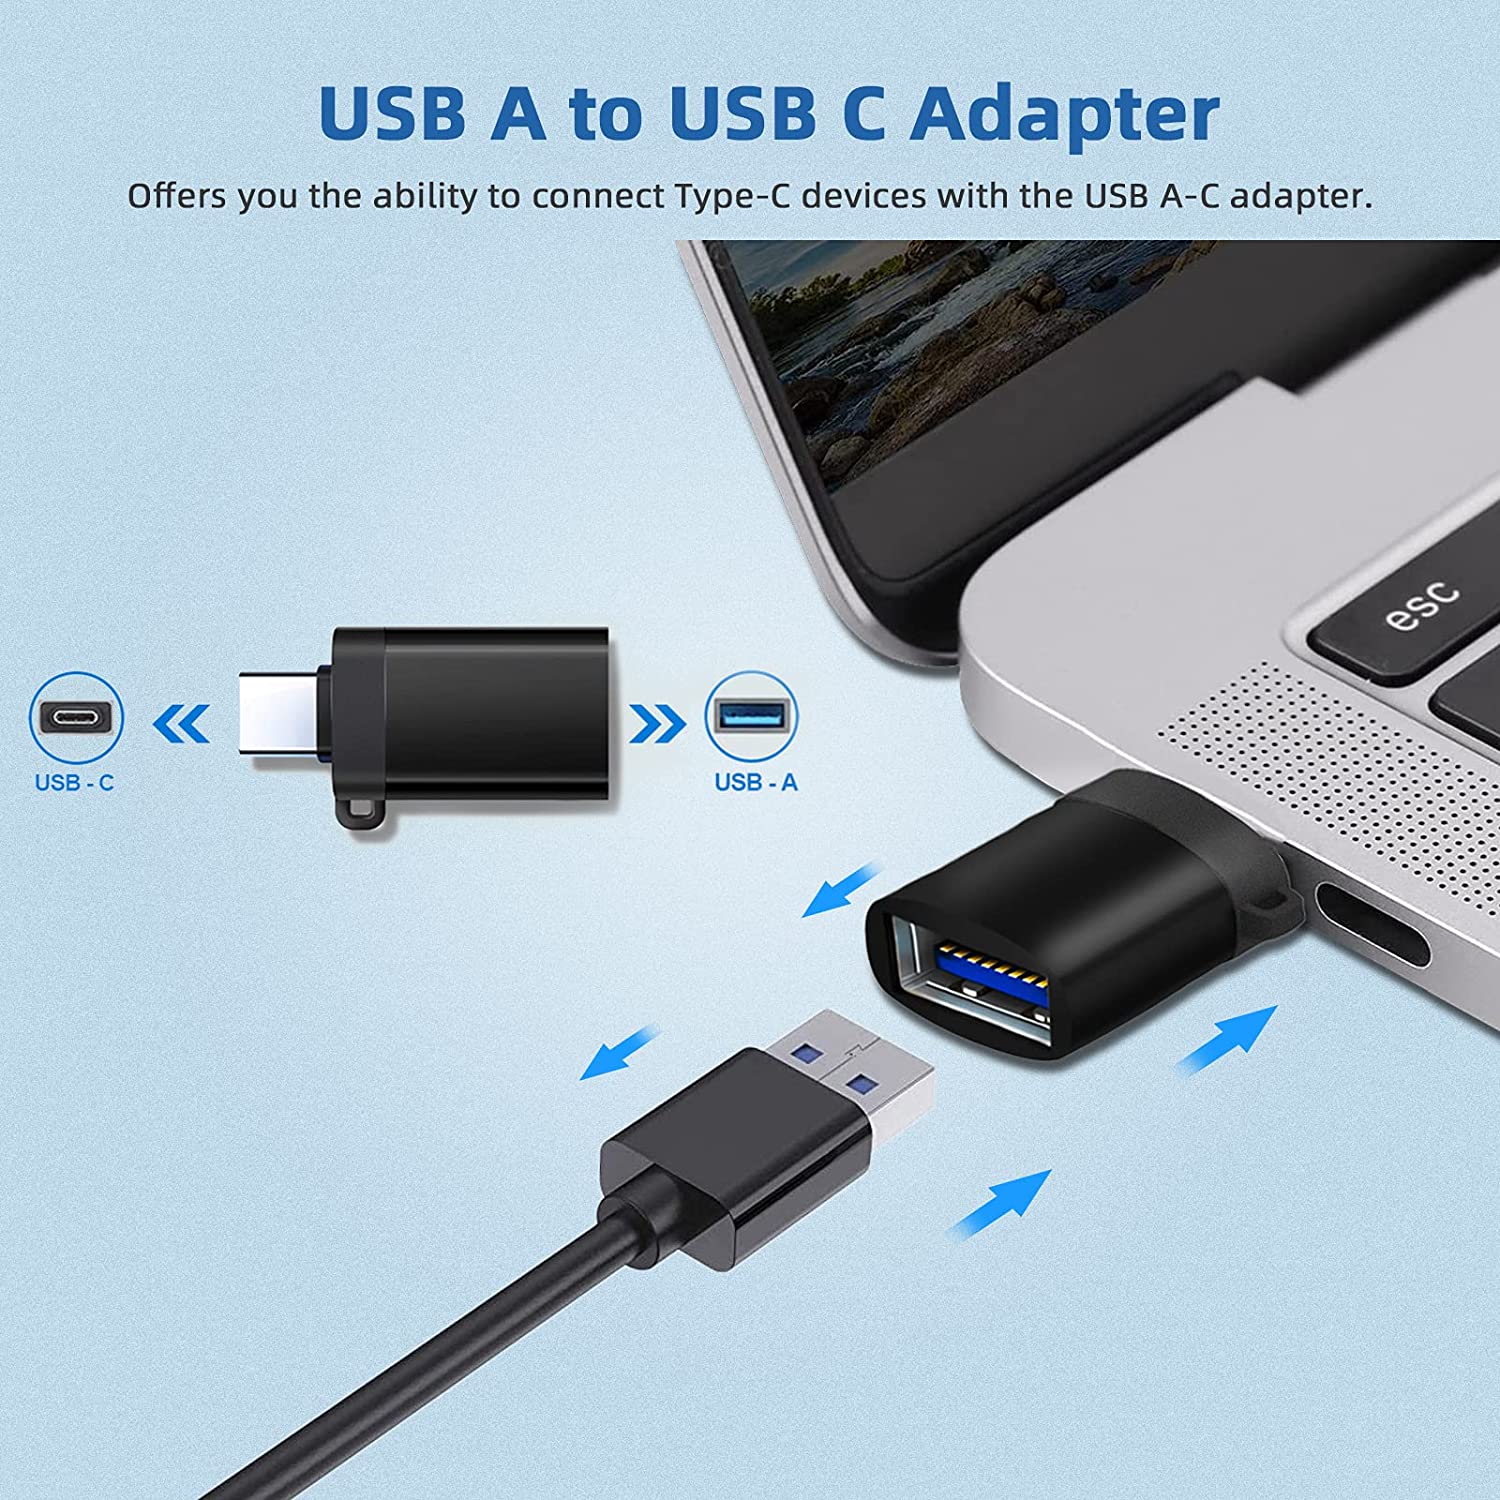 The webcam comes with a USB A-to-USB C adapter, allowing you to connect the USB-A to USB-C port on your computer.